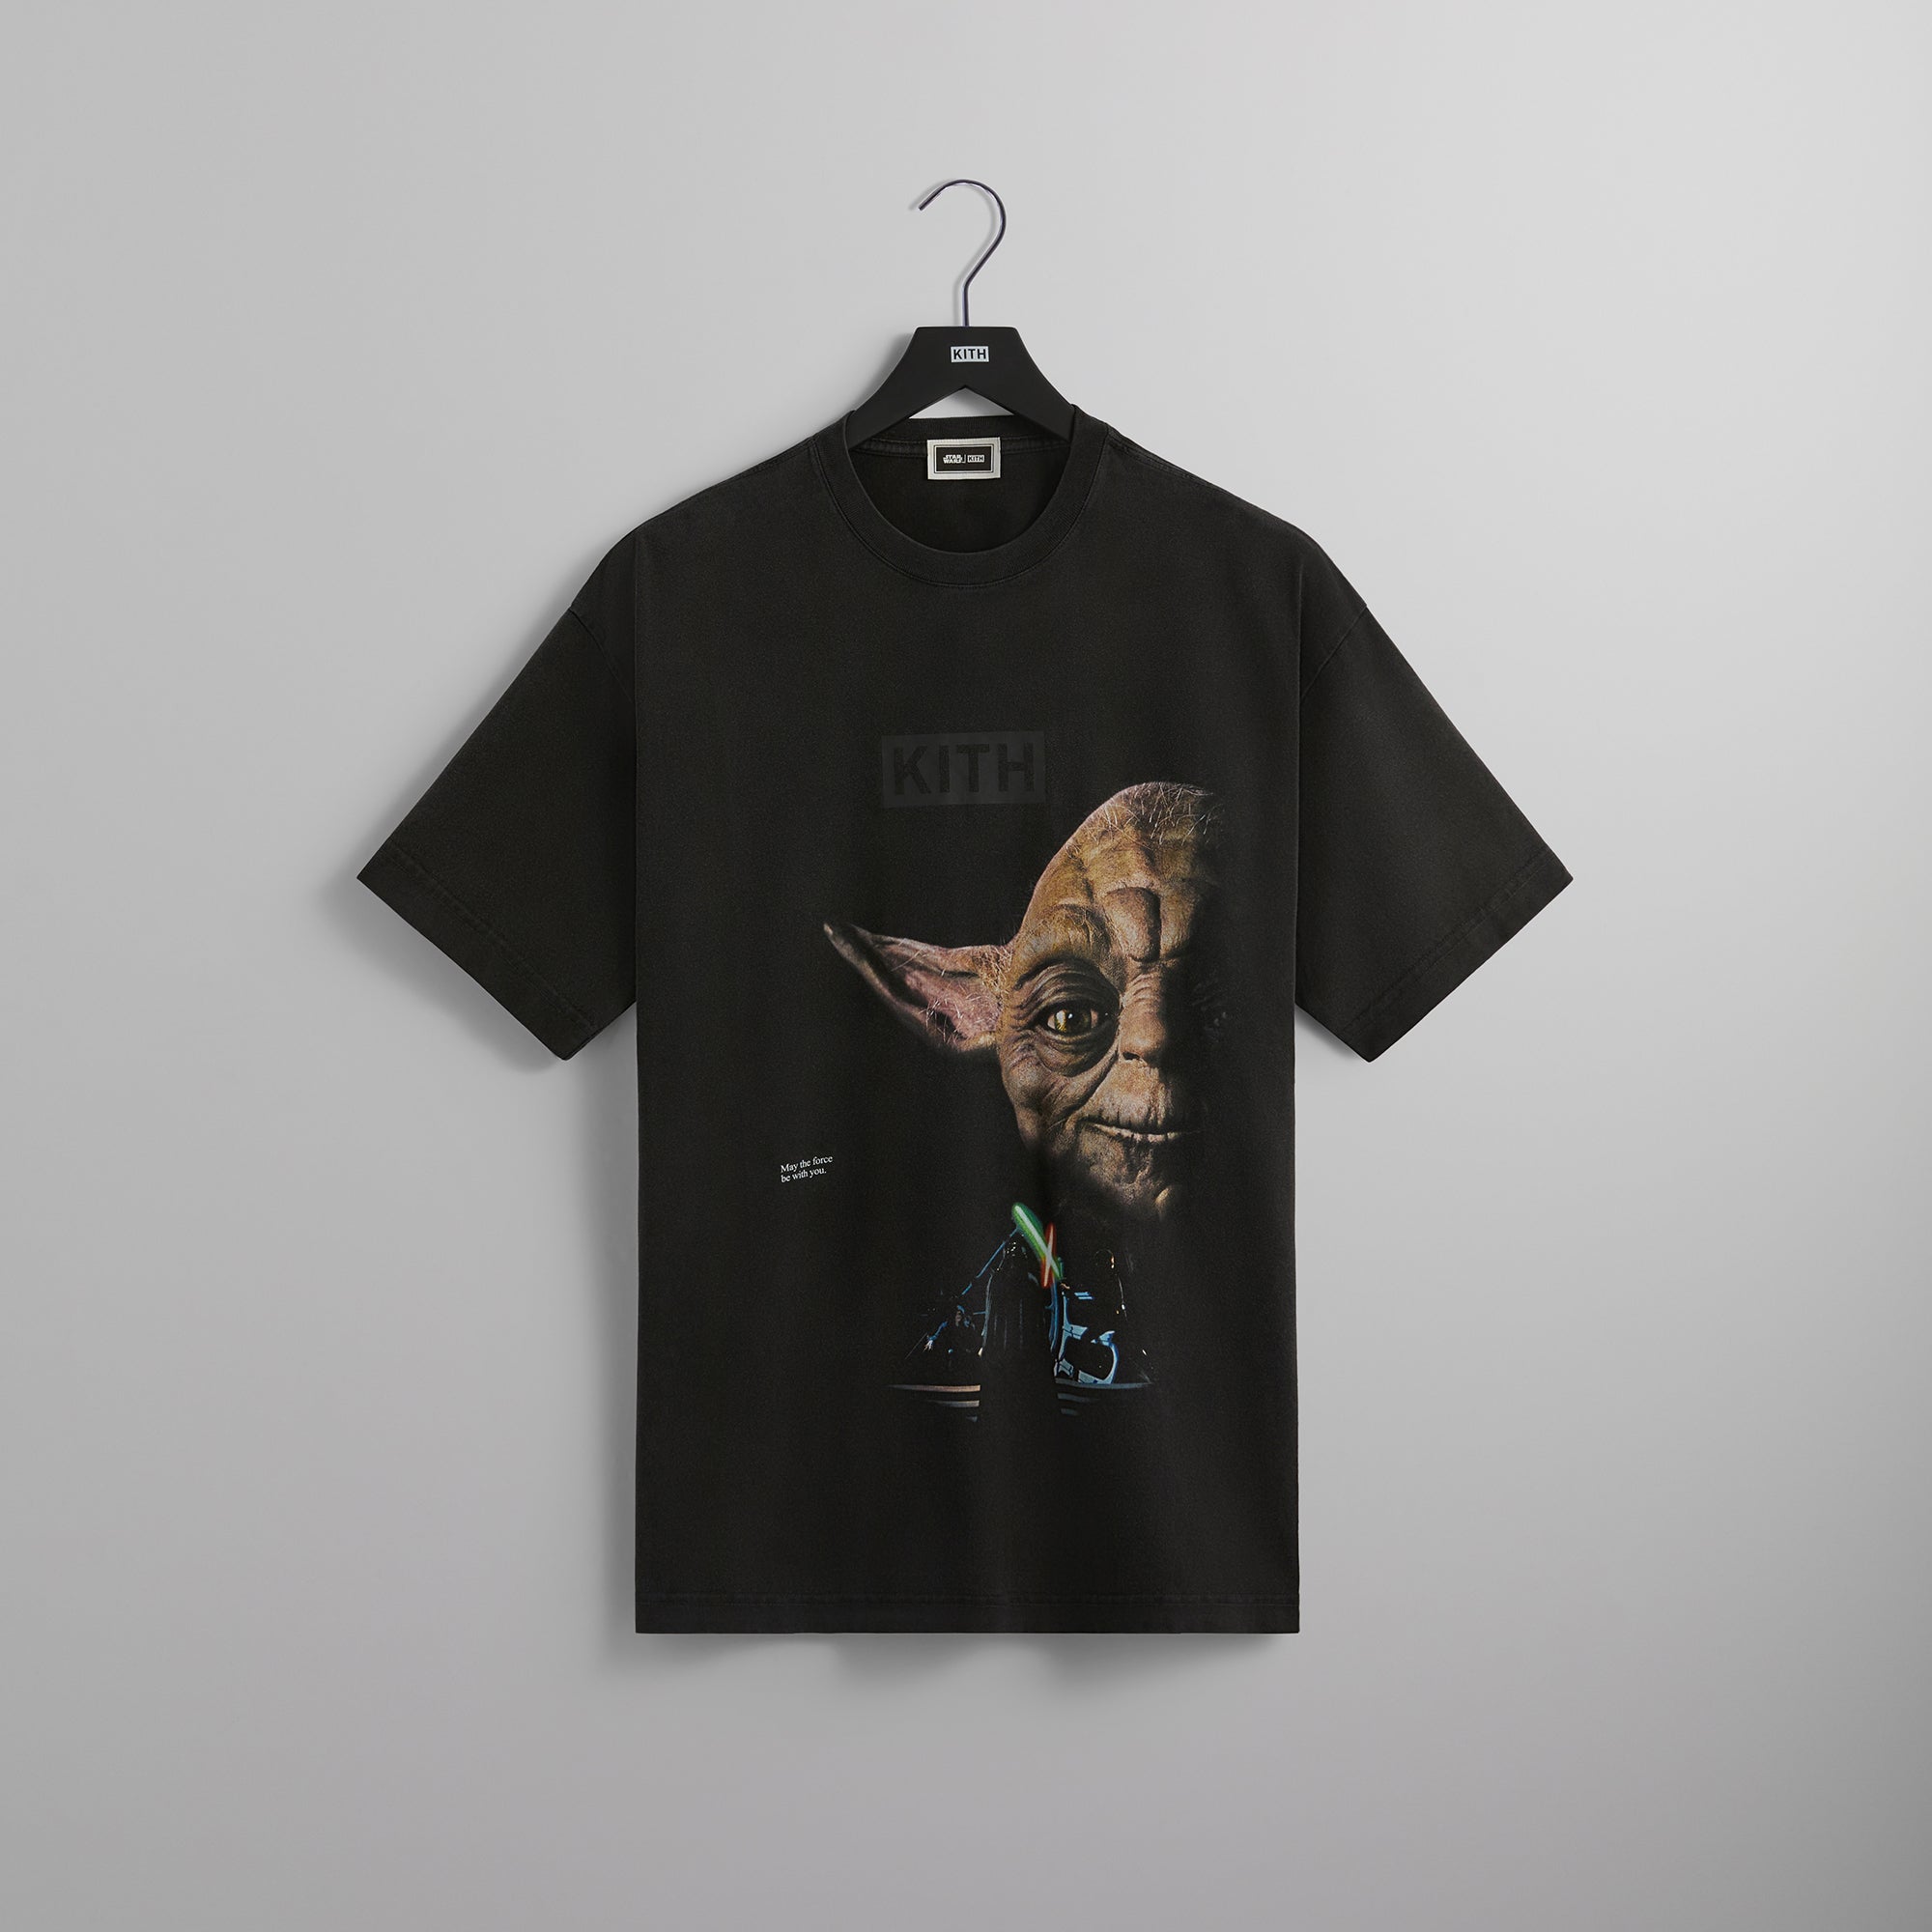 Tシャツ/カットソー(半袖/袖なし)新品 STAR WARS Kith Droids Vintage Tee